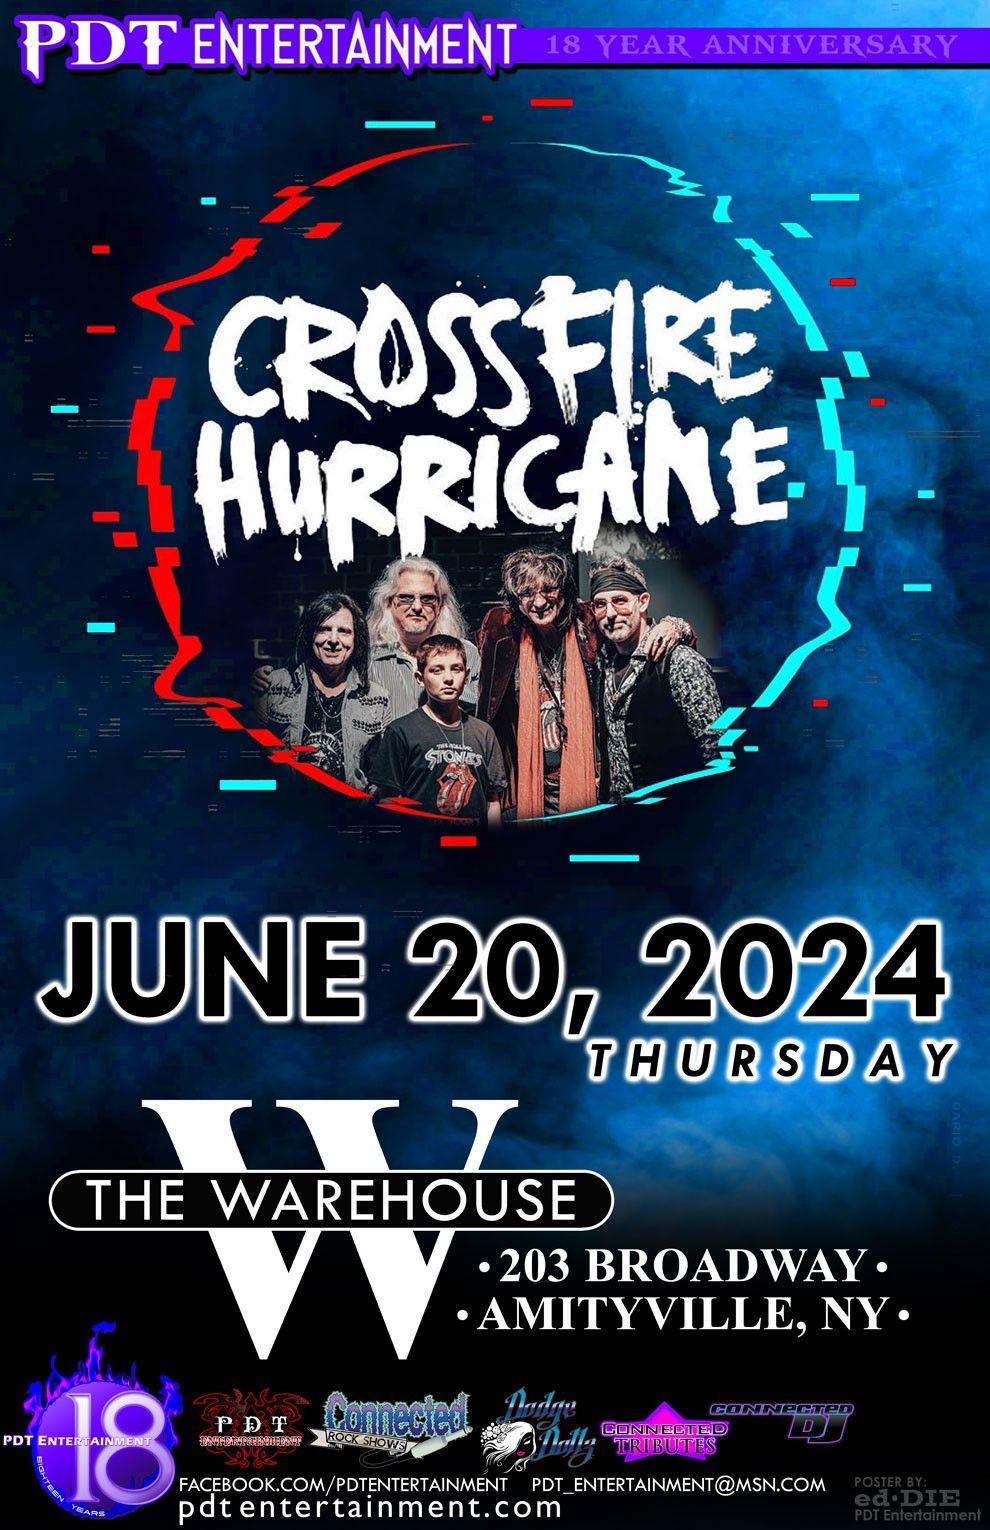 a concert poster for crossfire hurricane on june 20 , 2024